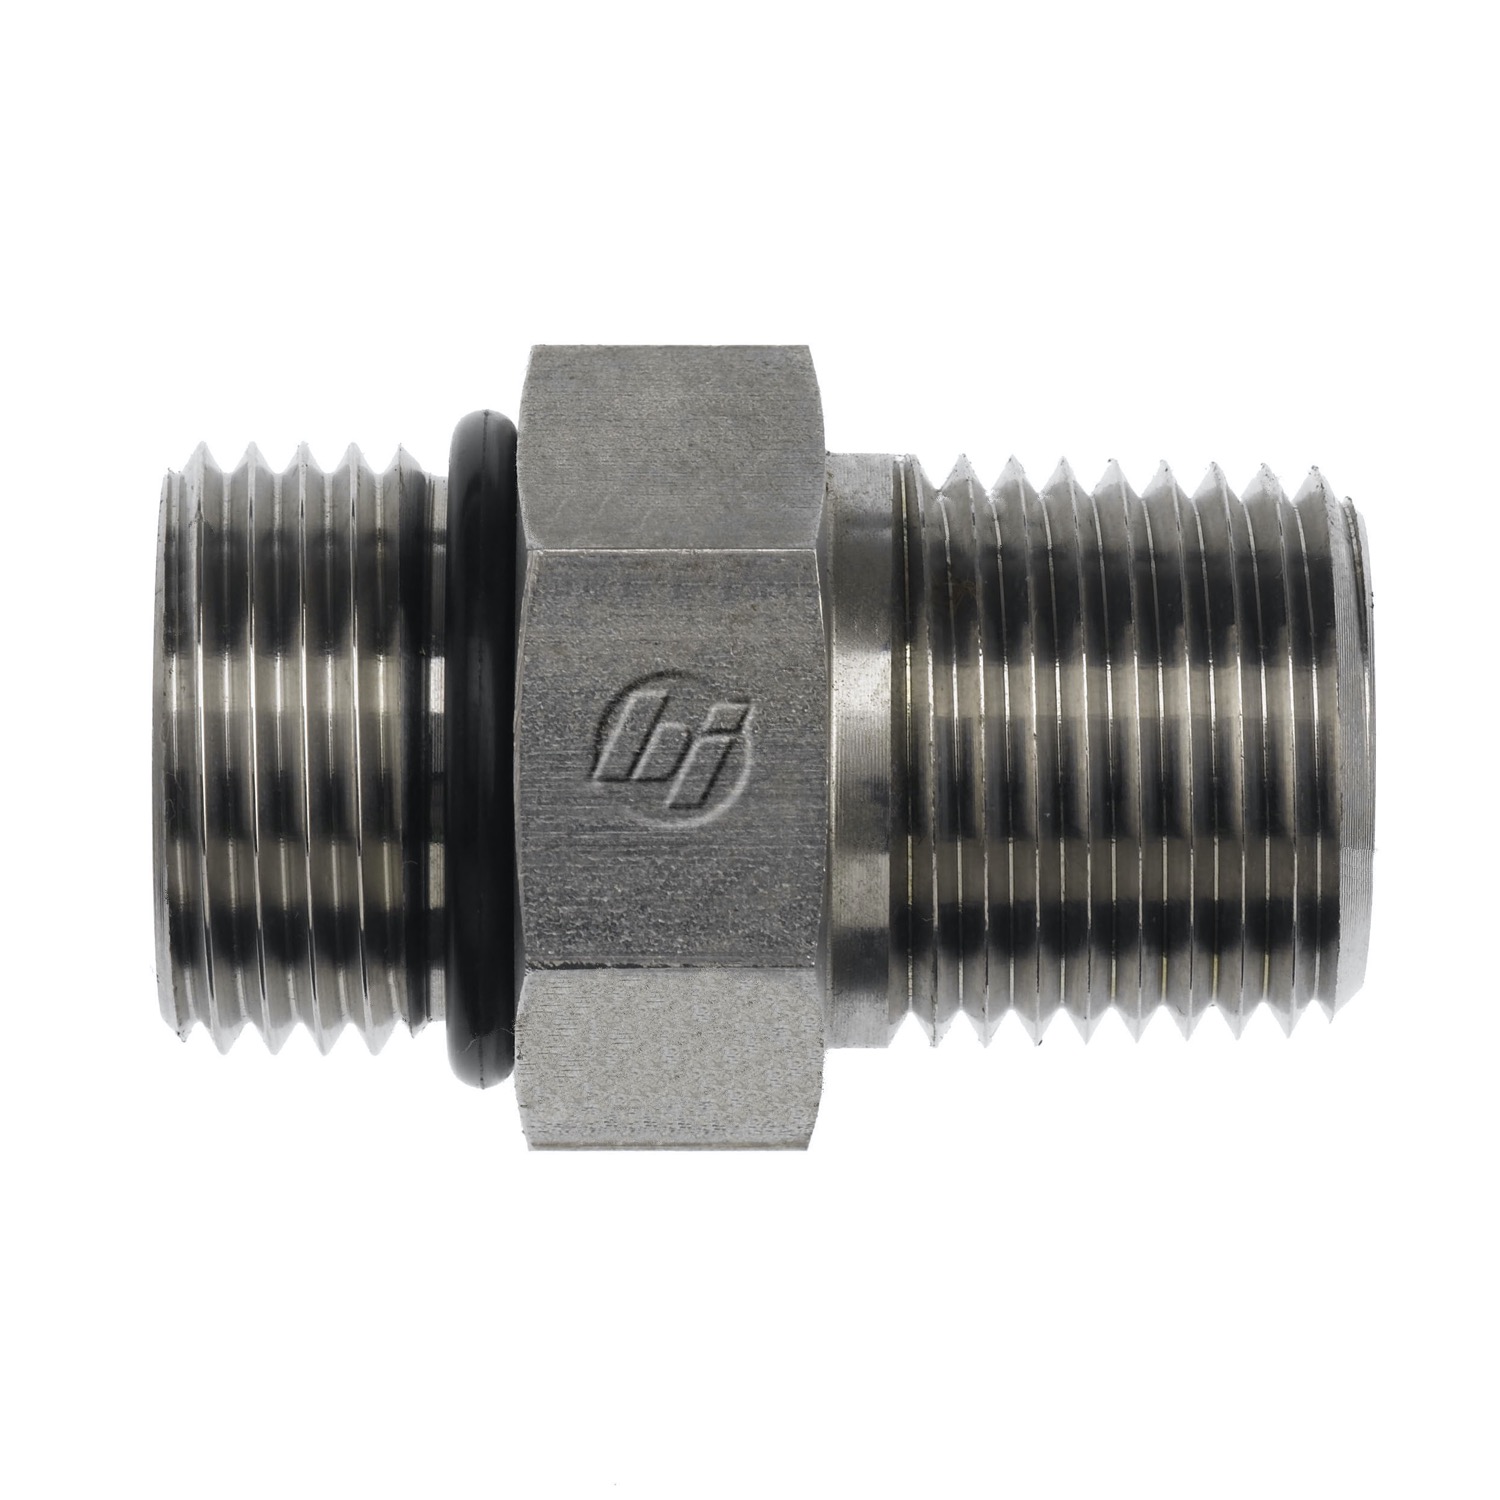 Hydraulic Hose Adapters - Straight Fitting, O-Ring Boss to NPTF, 6401 Series 6401-06-08-O